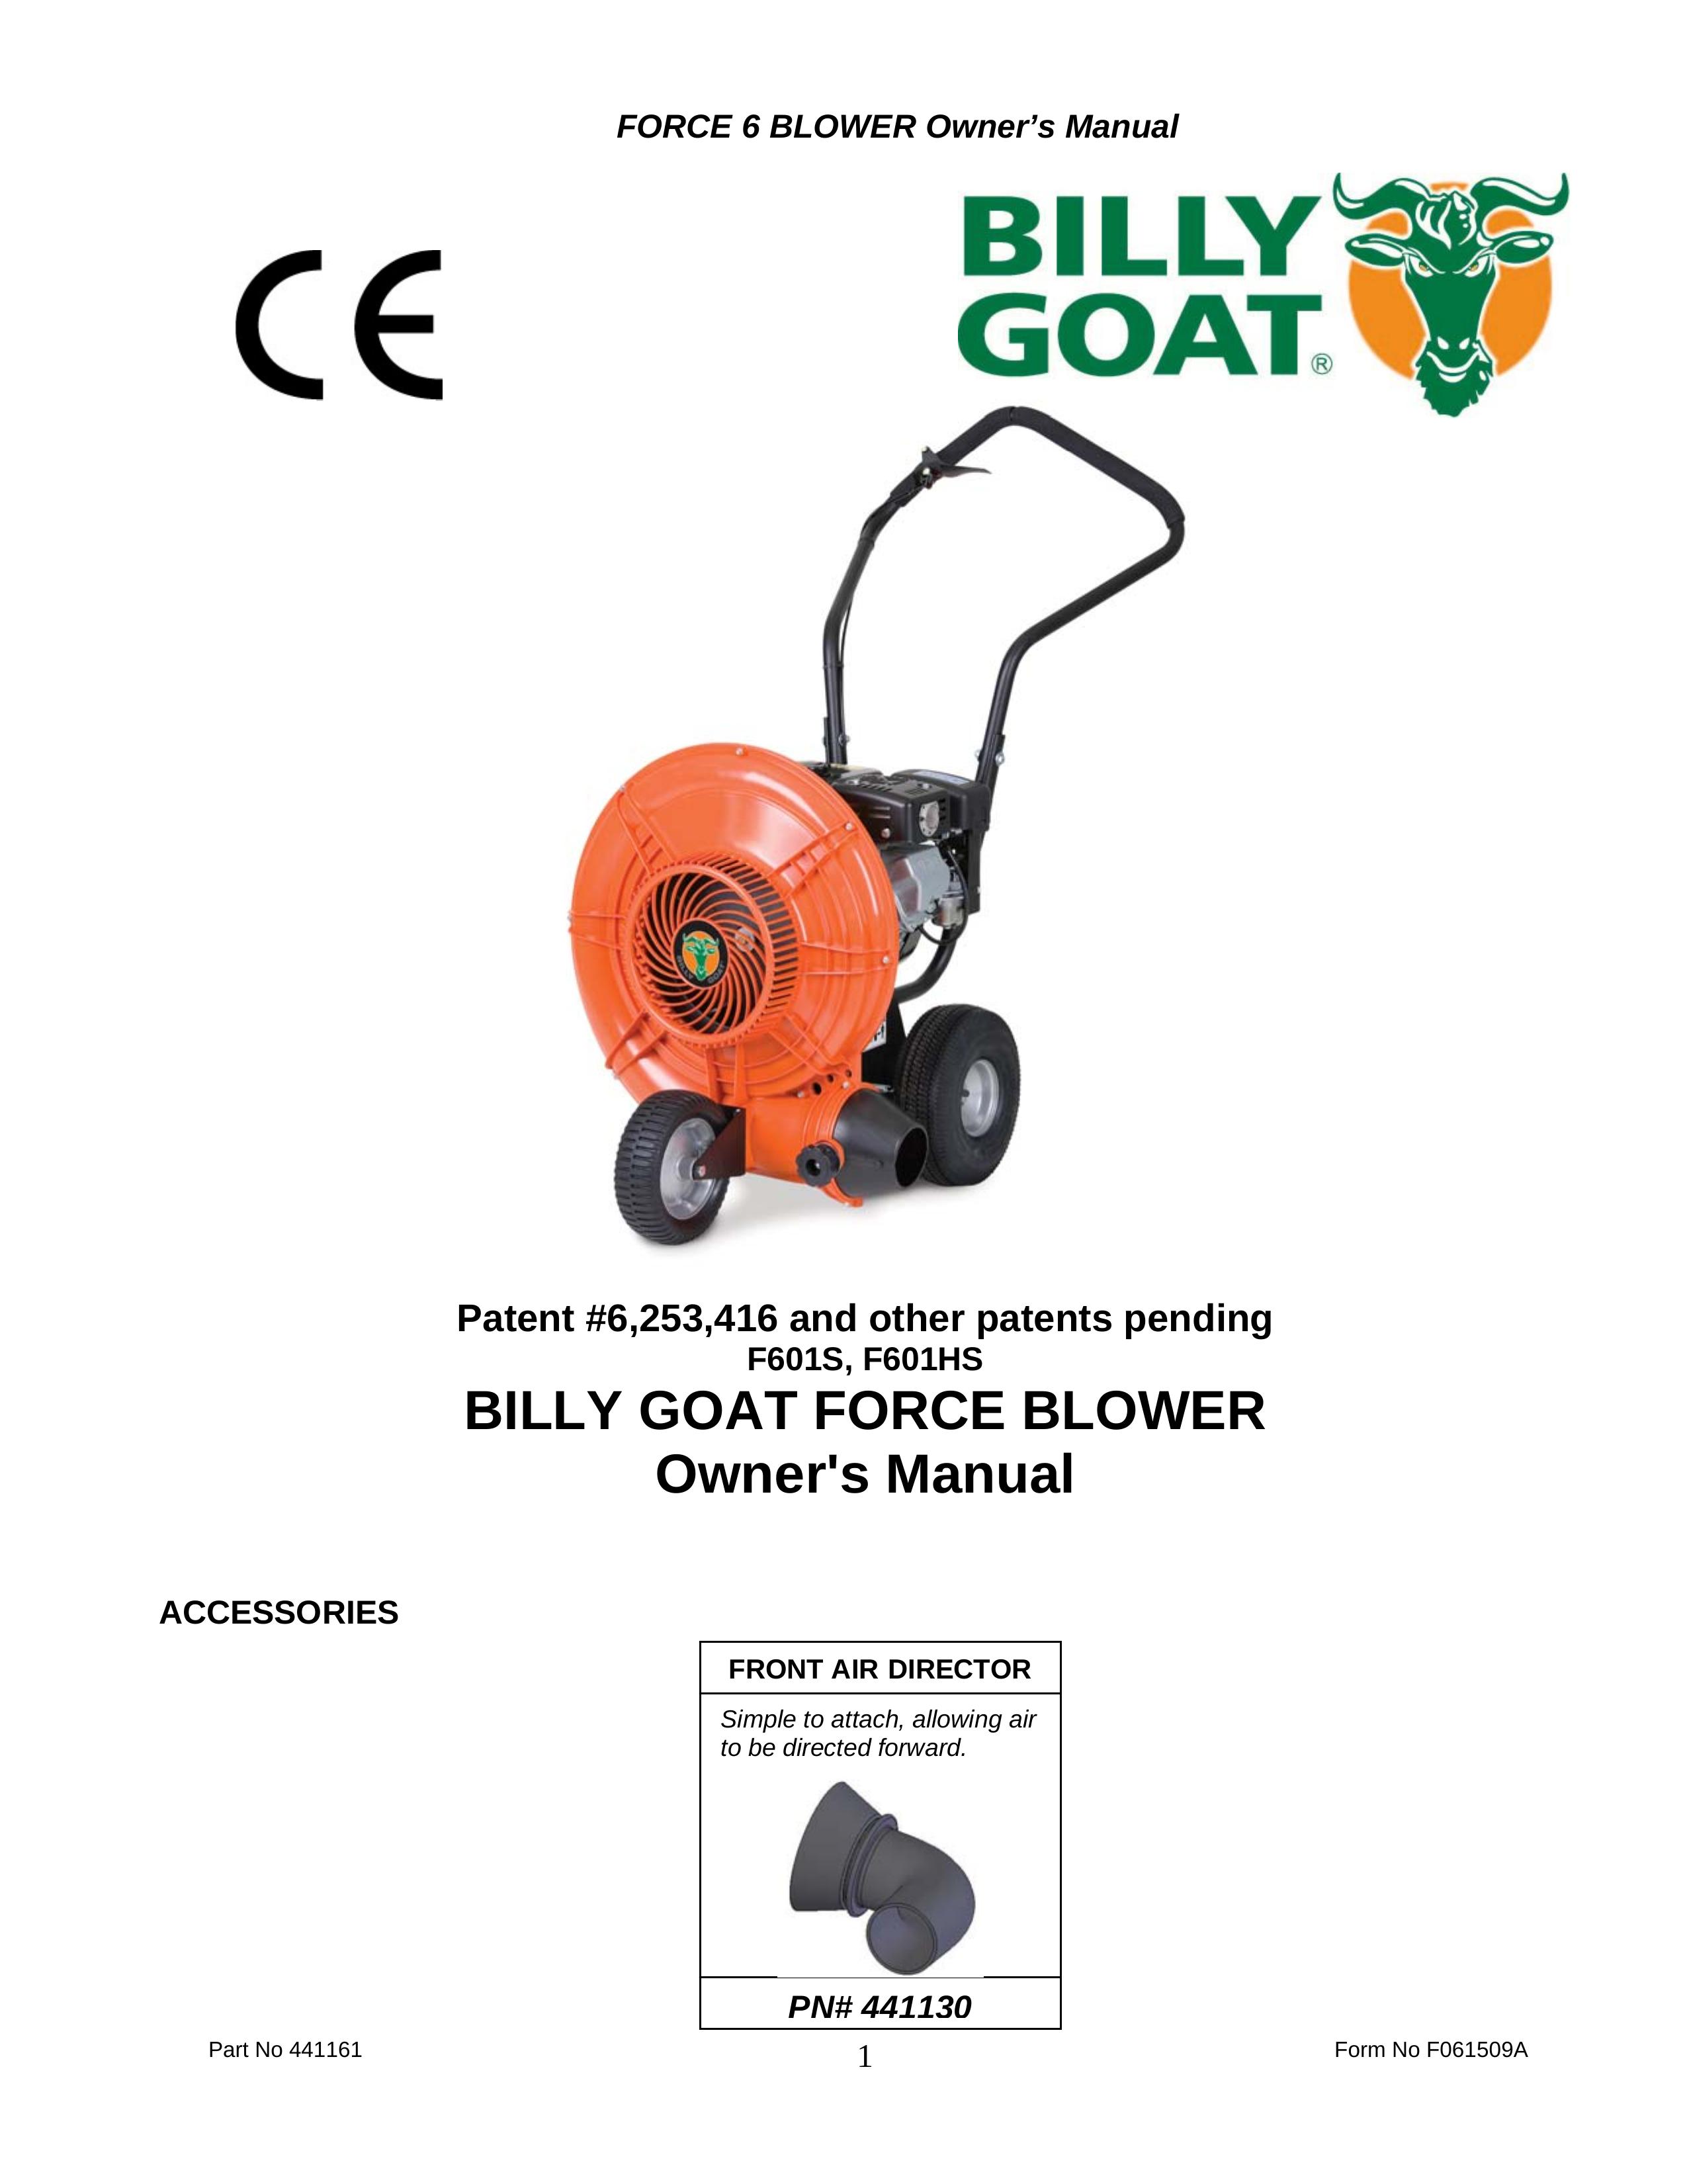 Billy Goat F601HS Blower User Manual